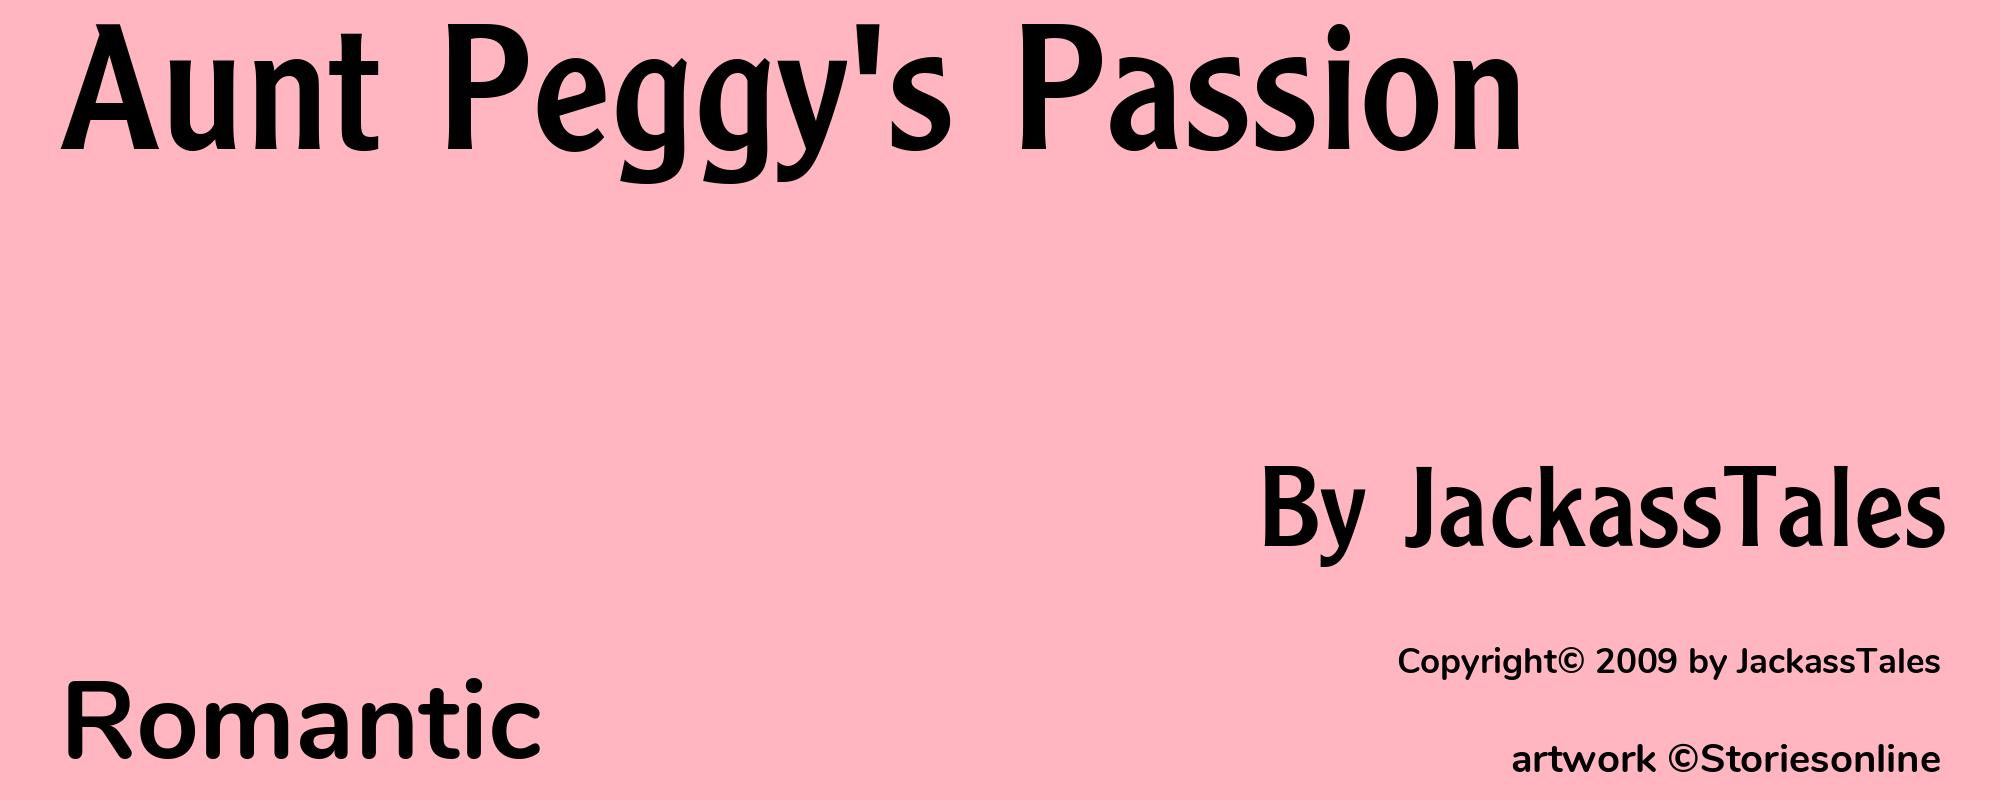 Aunt Peggy's Passion - Cover